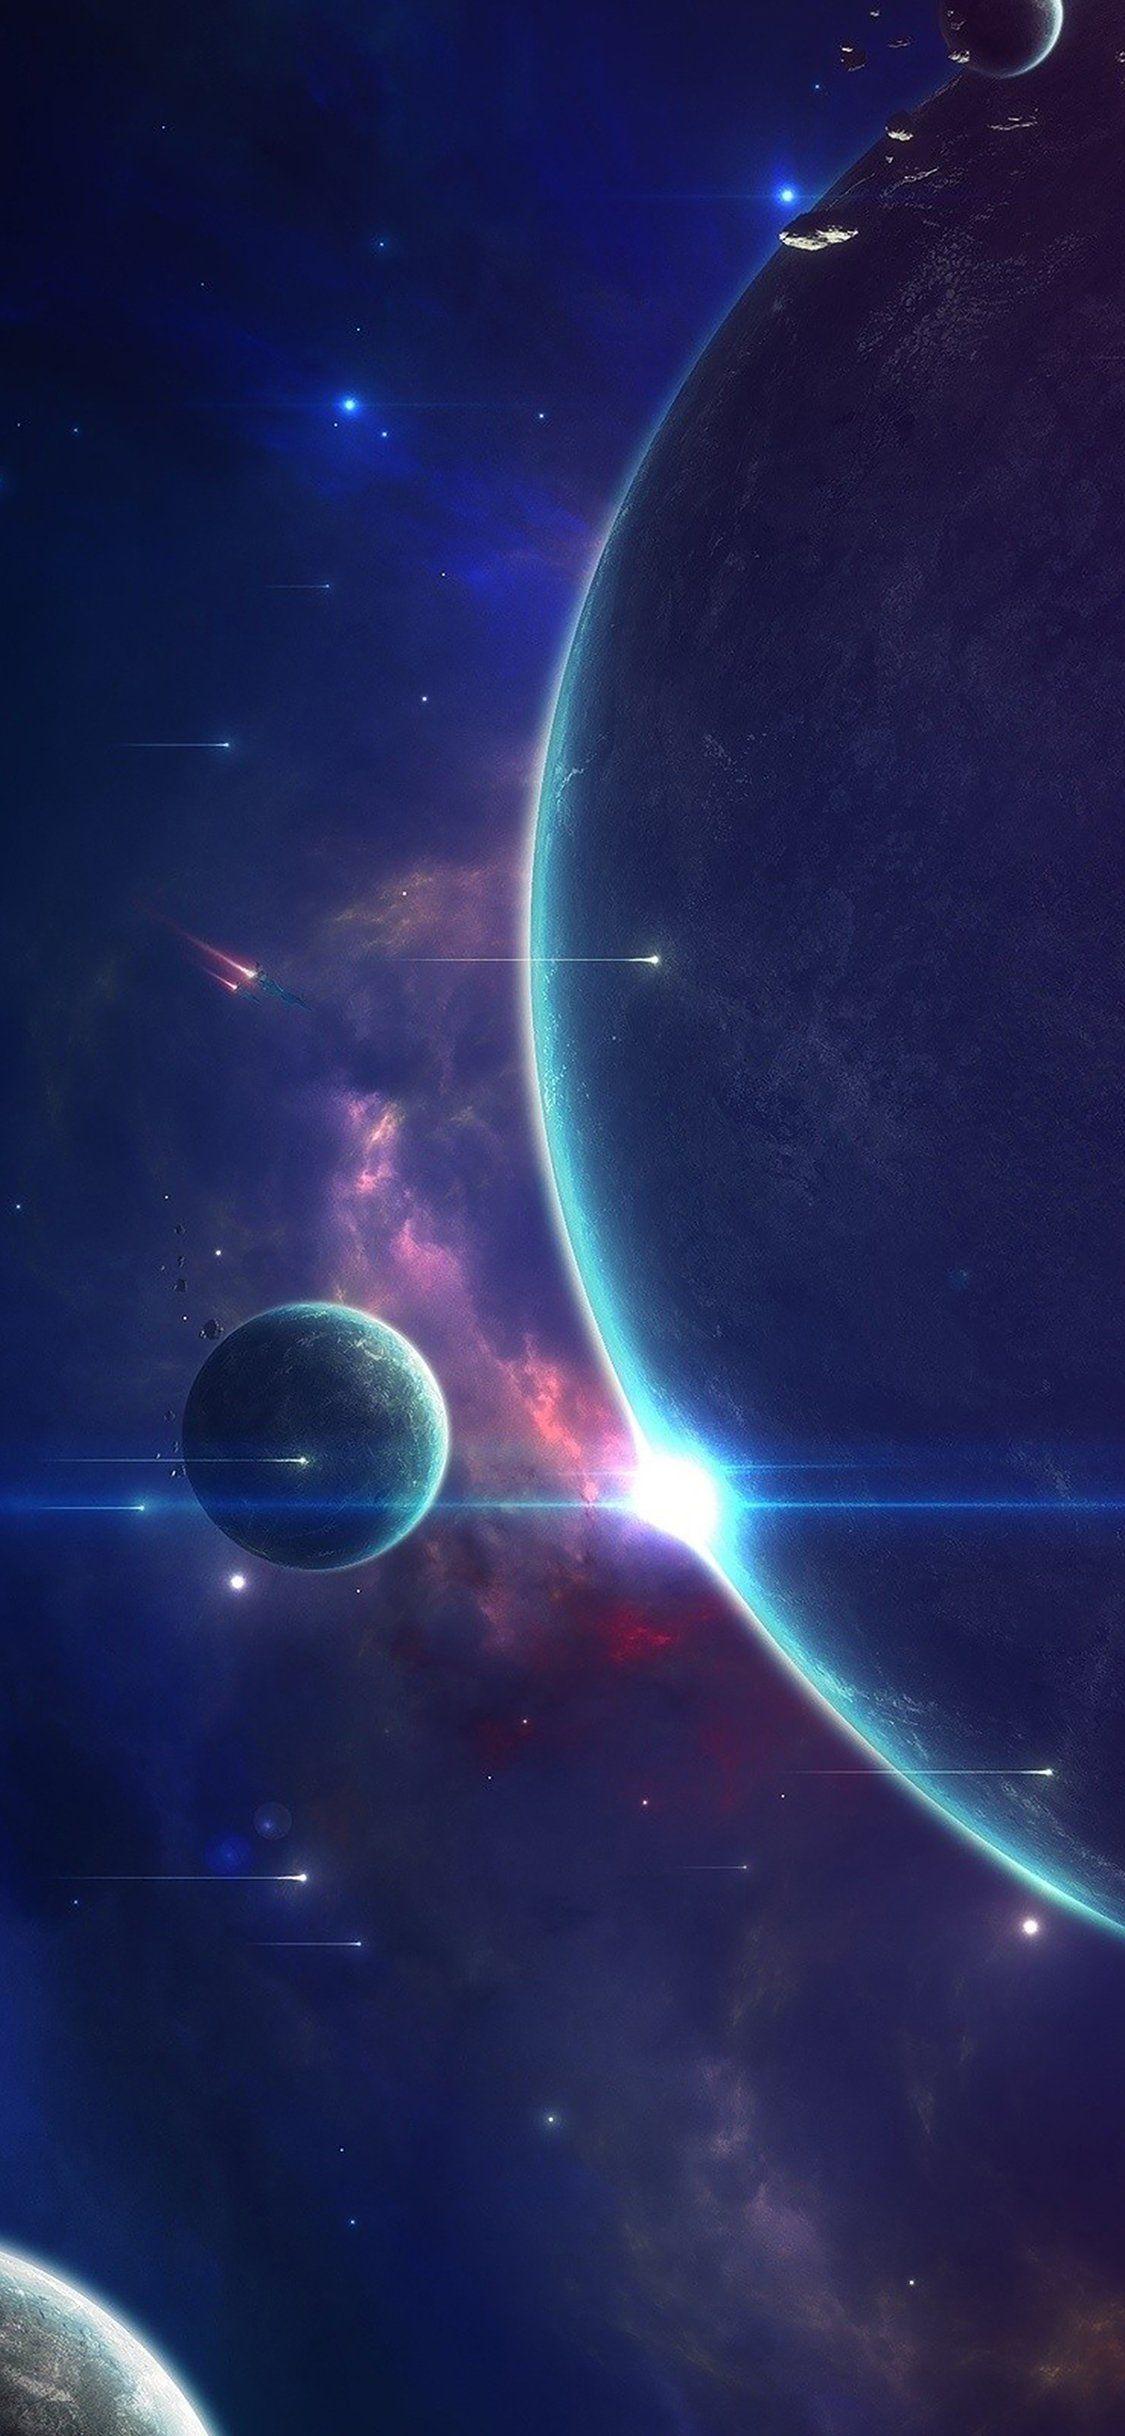 Download Outer Space Wallpaper Iphone X Background